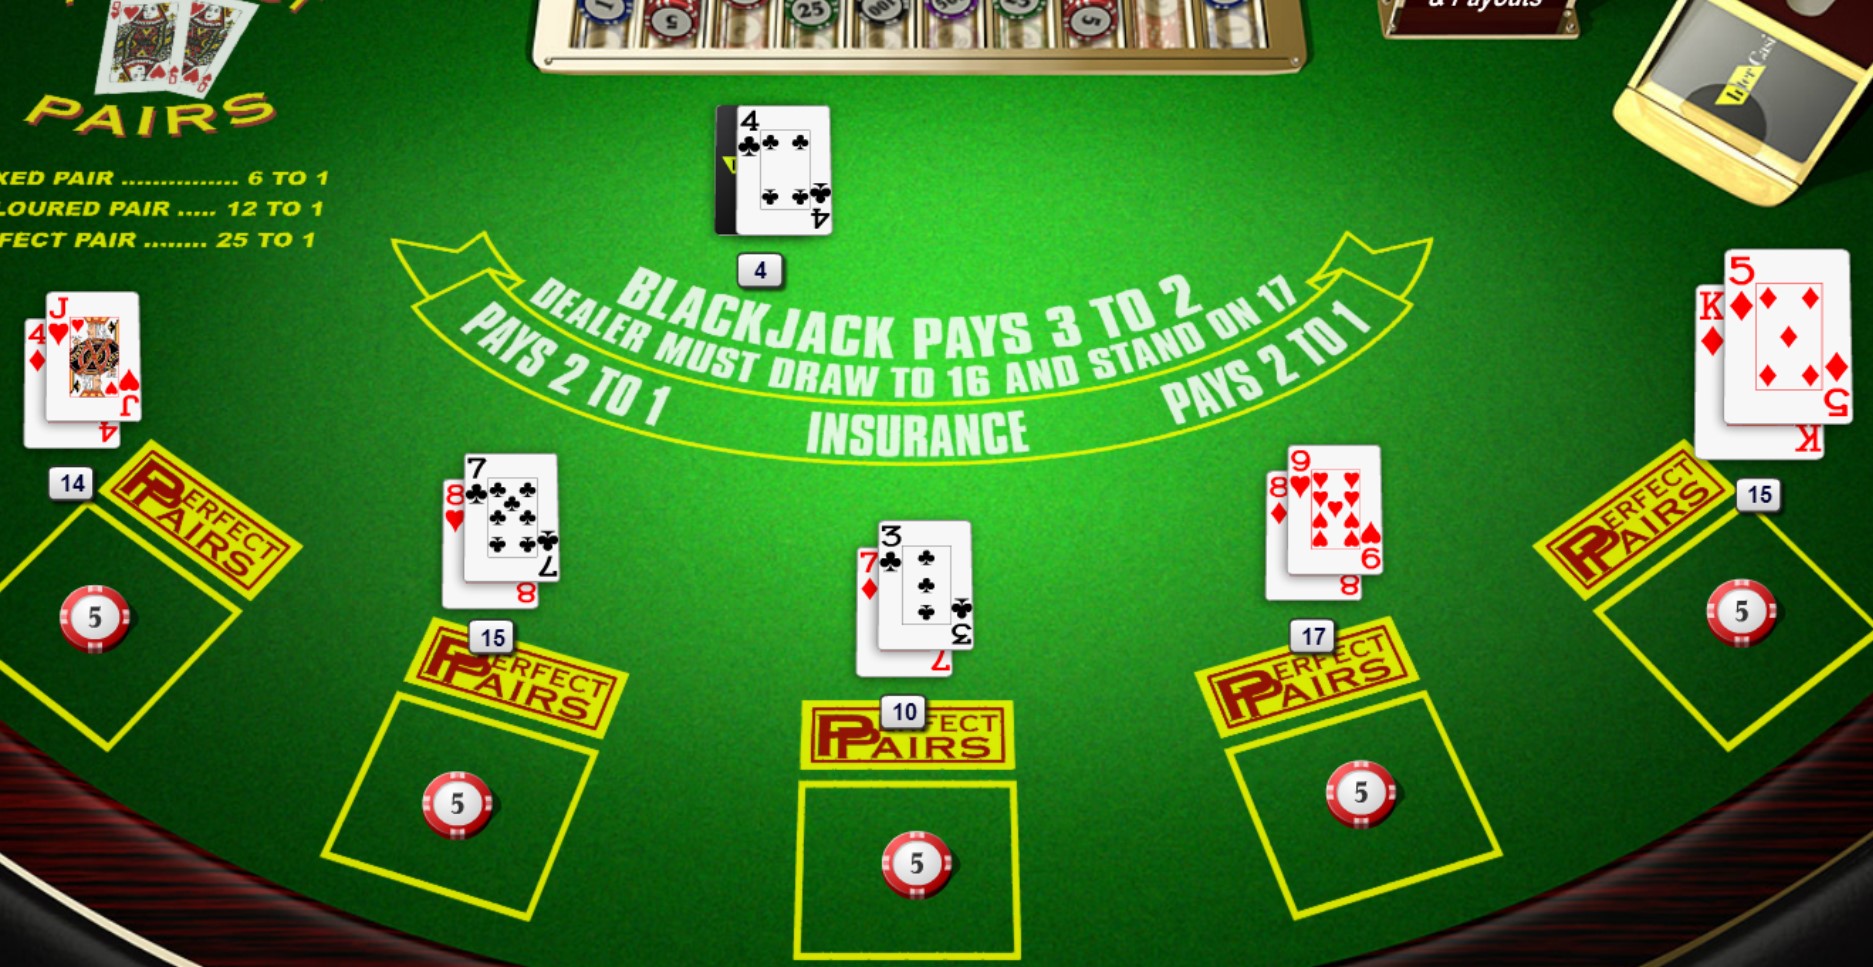 Tips that can help you manage your bankroll when playing blackjack